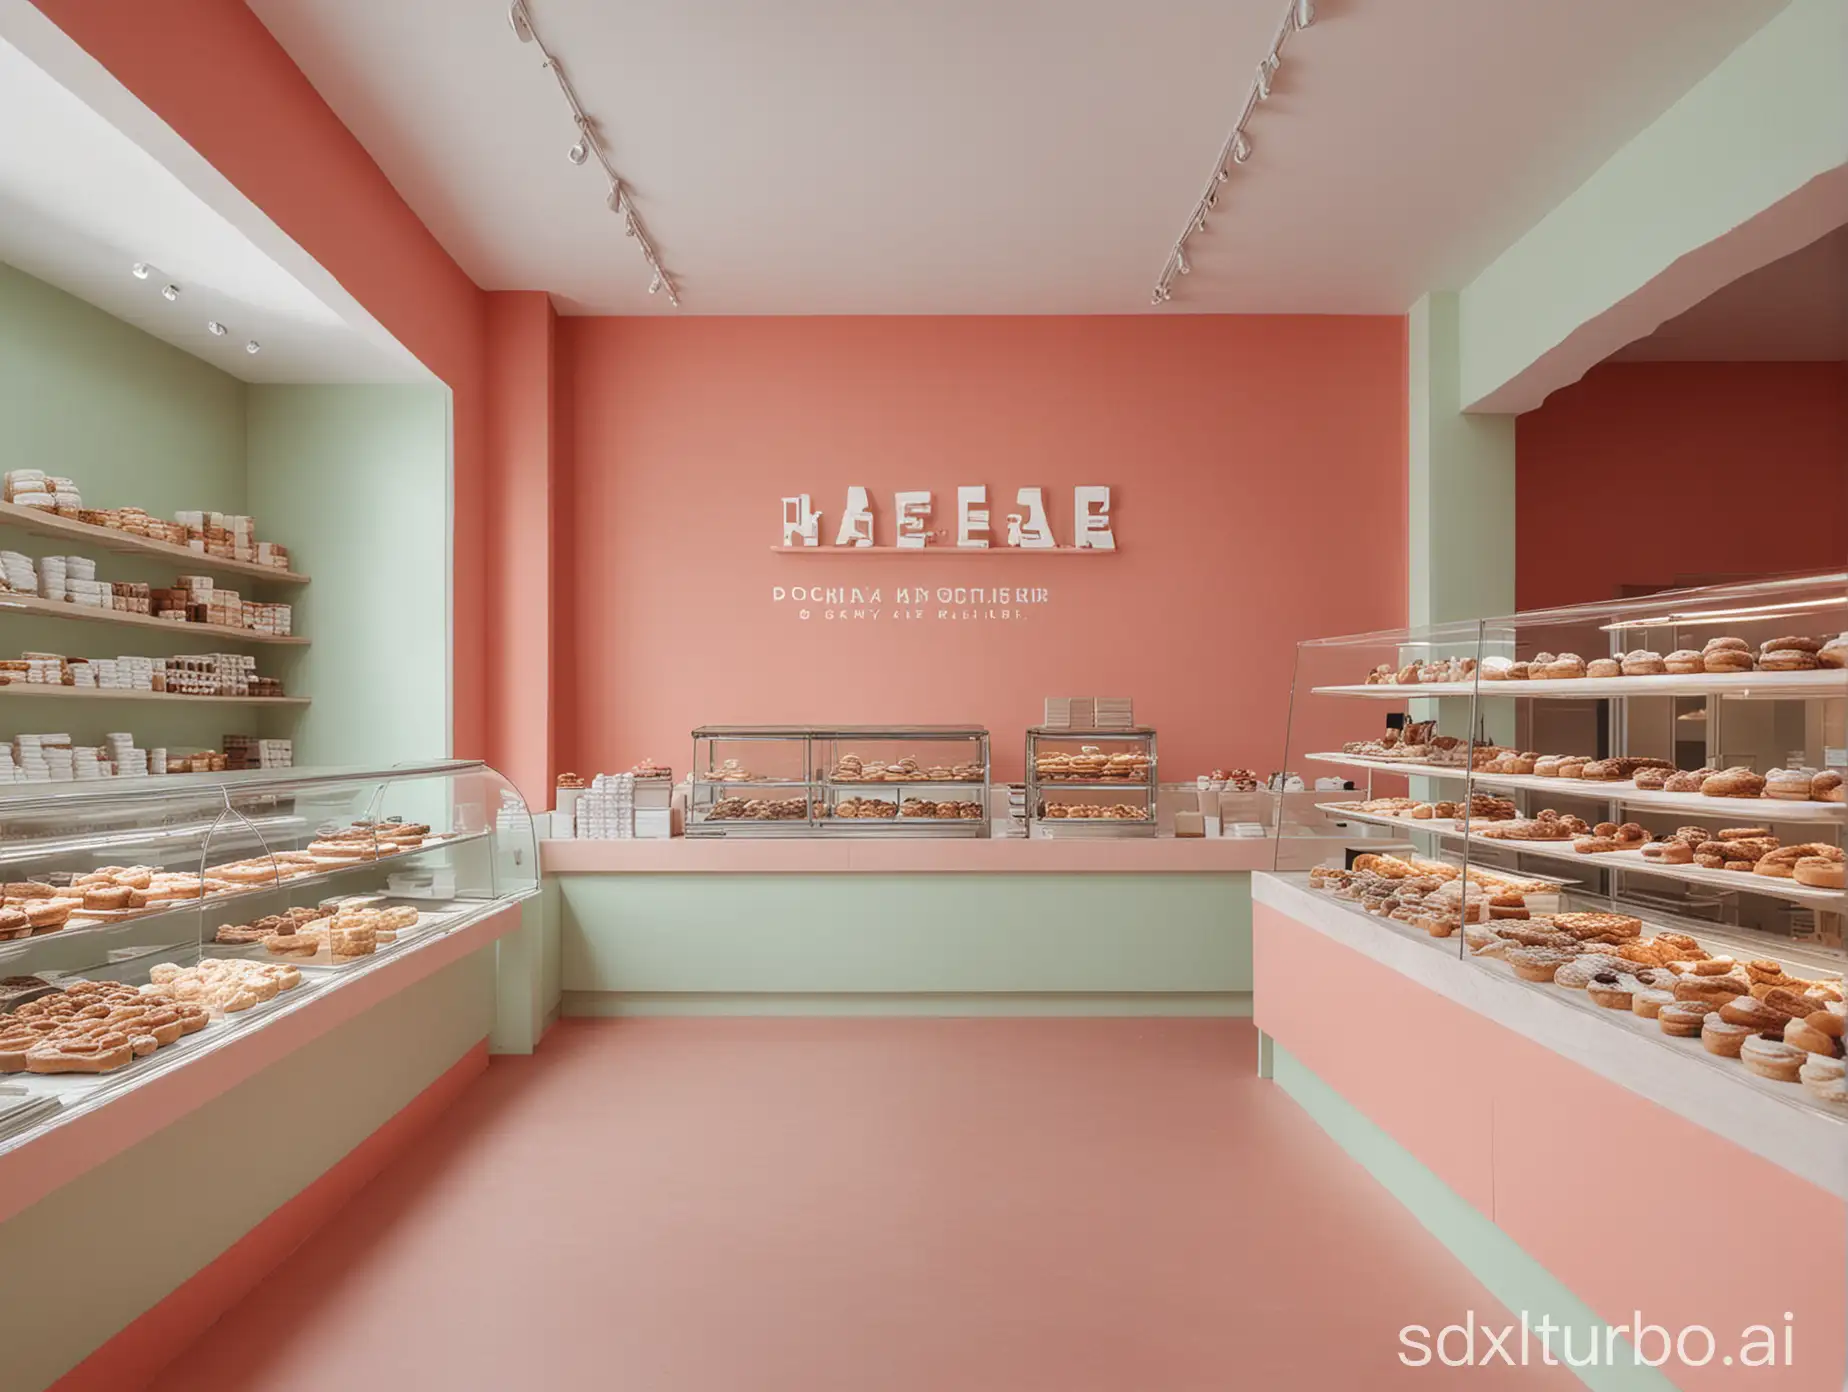 The interior design of the minimalist bakery and pastry shop in pale red and pale green and white color with a large space